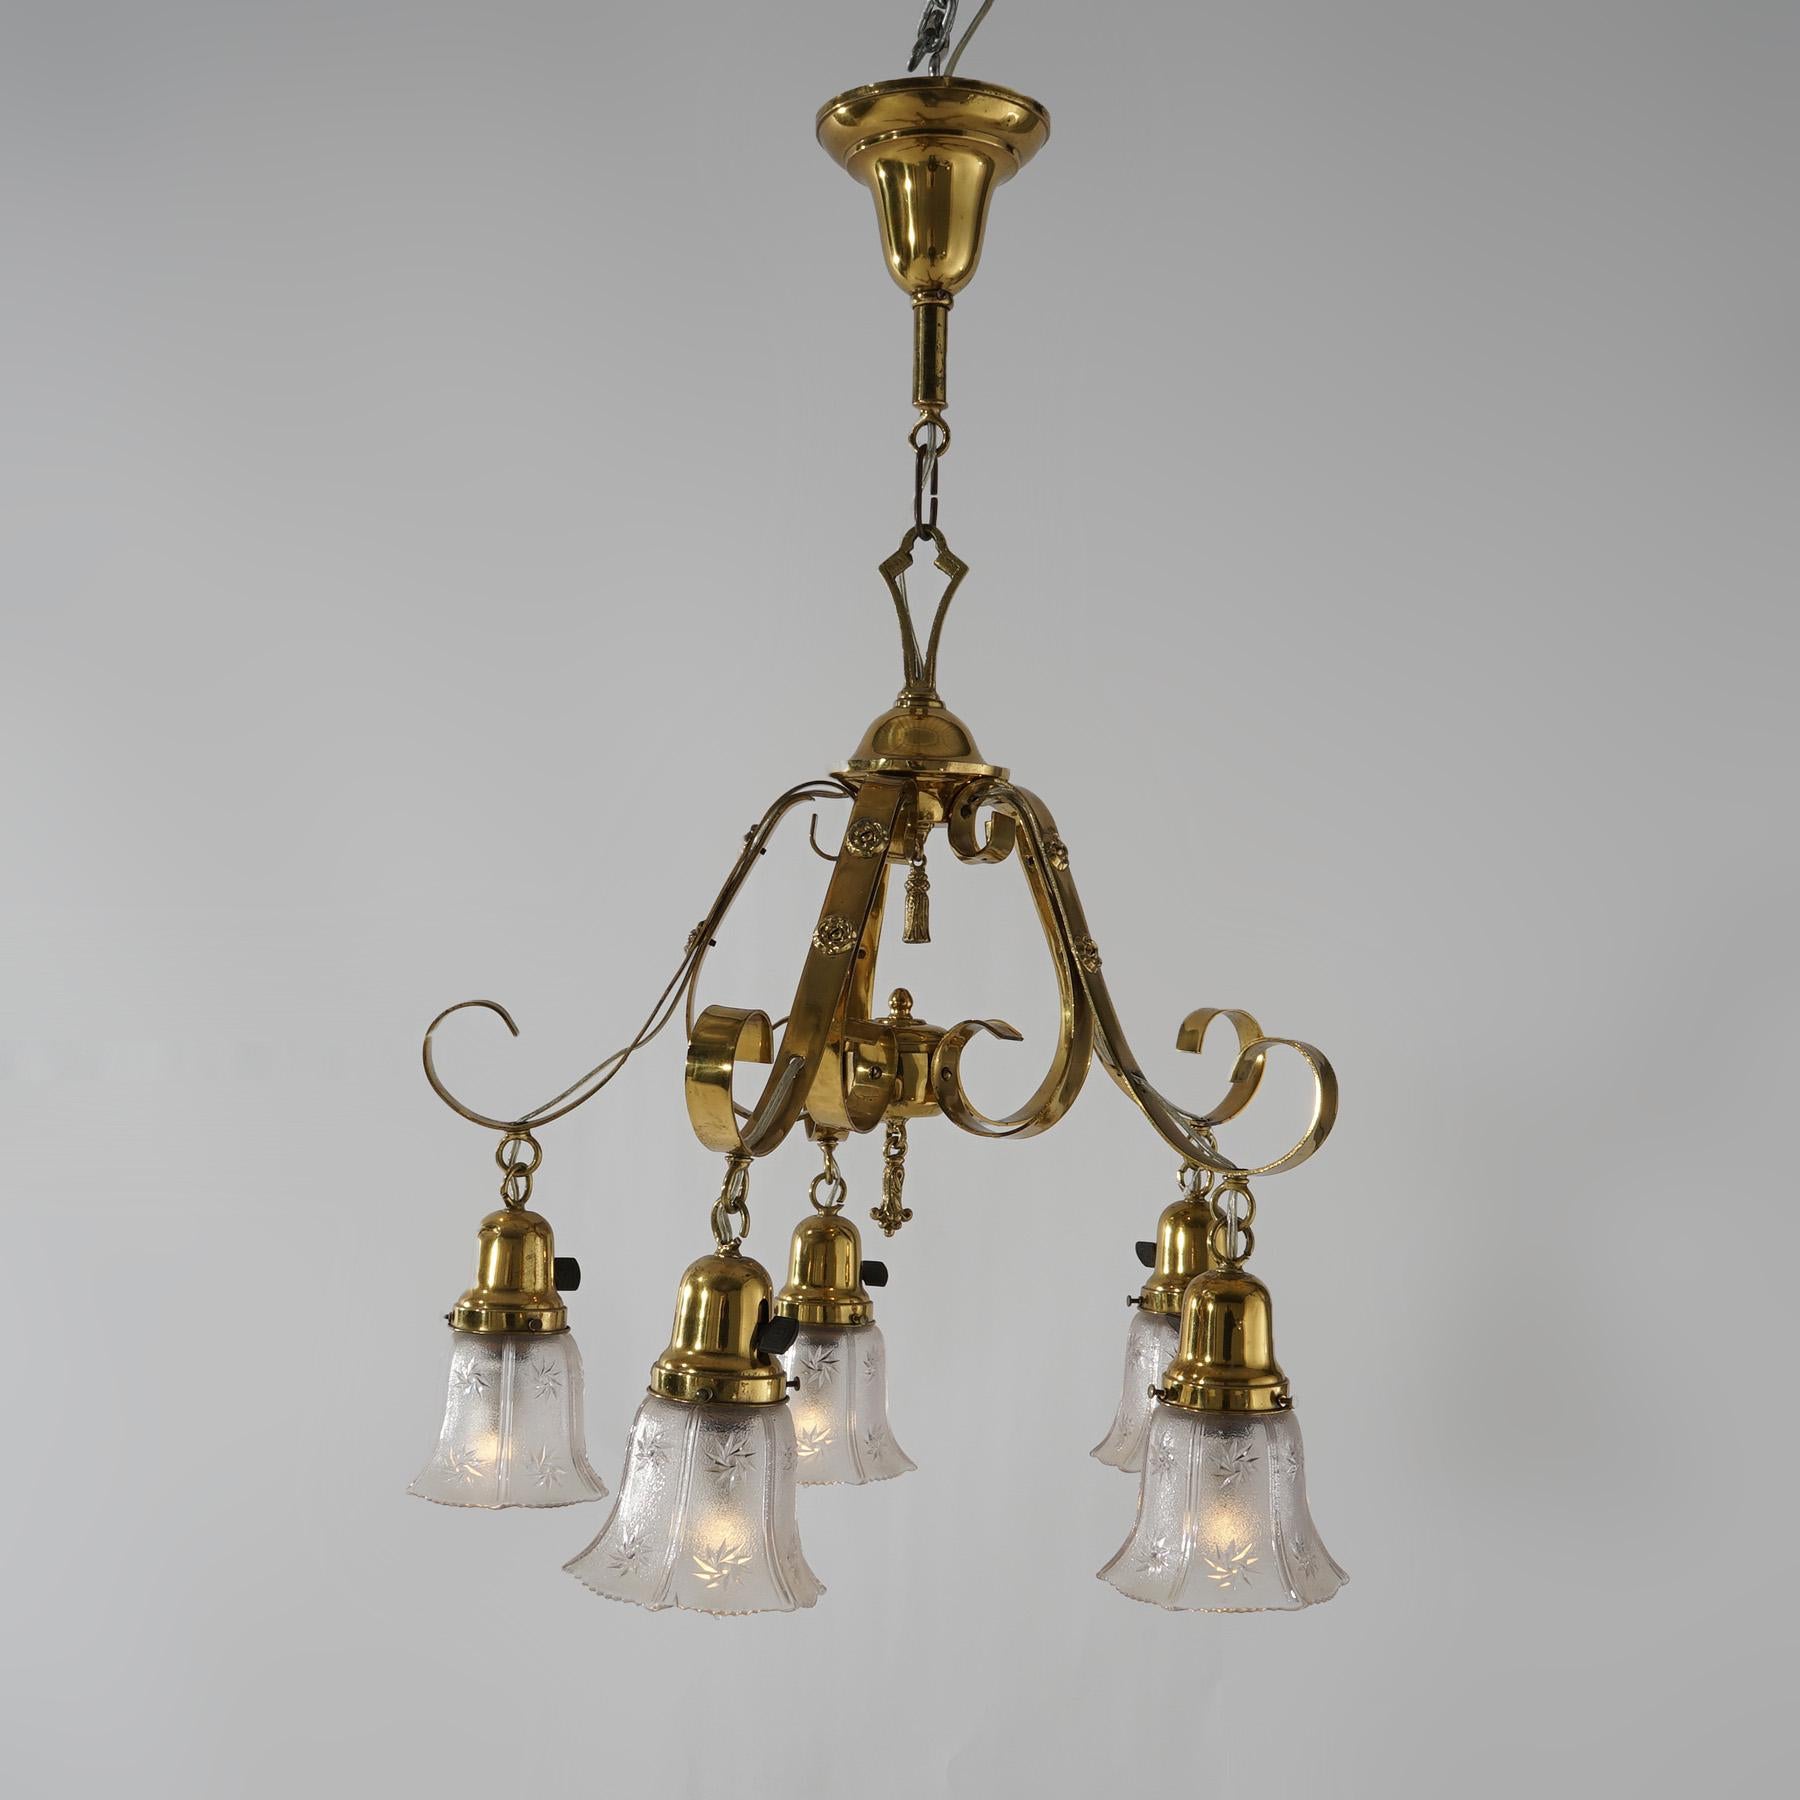 An antique Arts & Crafts chandelier offers gilt metal and brass frame with five scroll form arms terminating in embossed glass shades, circa 1920
Measures - 31